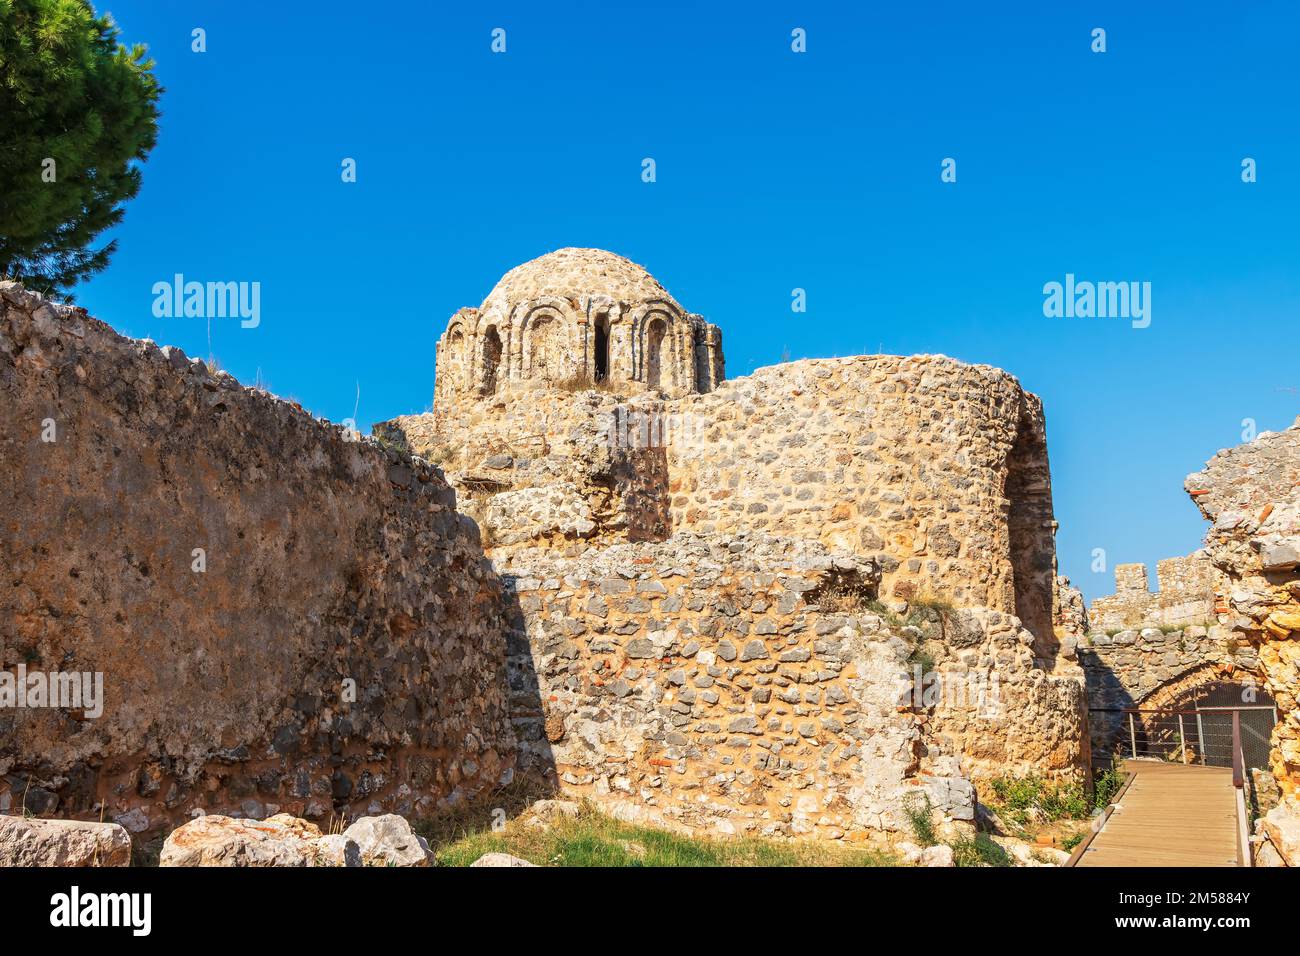 The church of St. George from the Byzantine period - Inner Fortress in Alanya Castle, Southern Turkey. Stock Photo